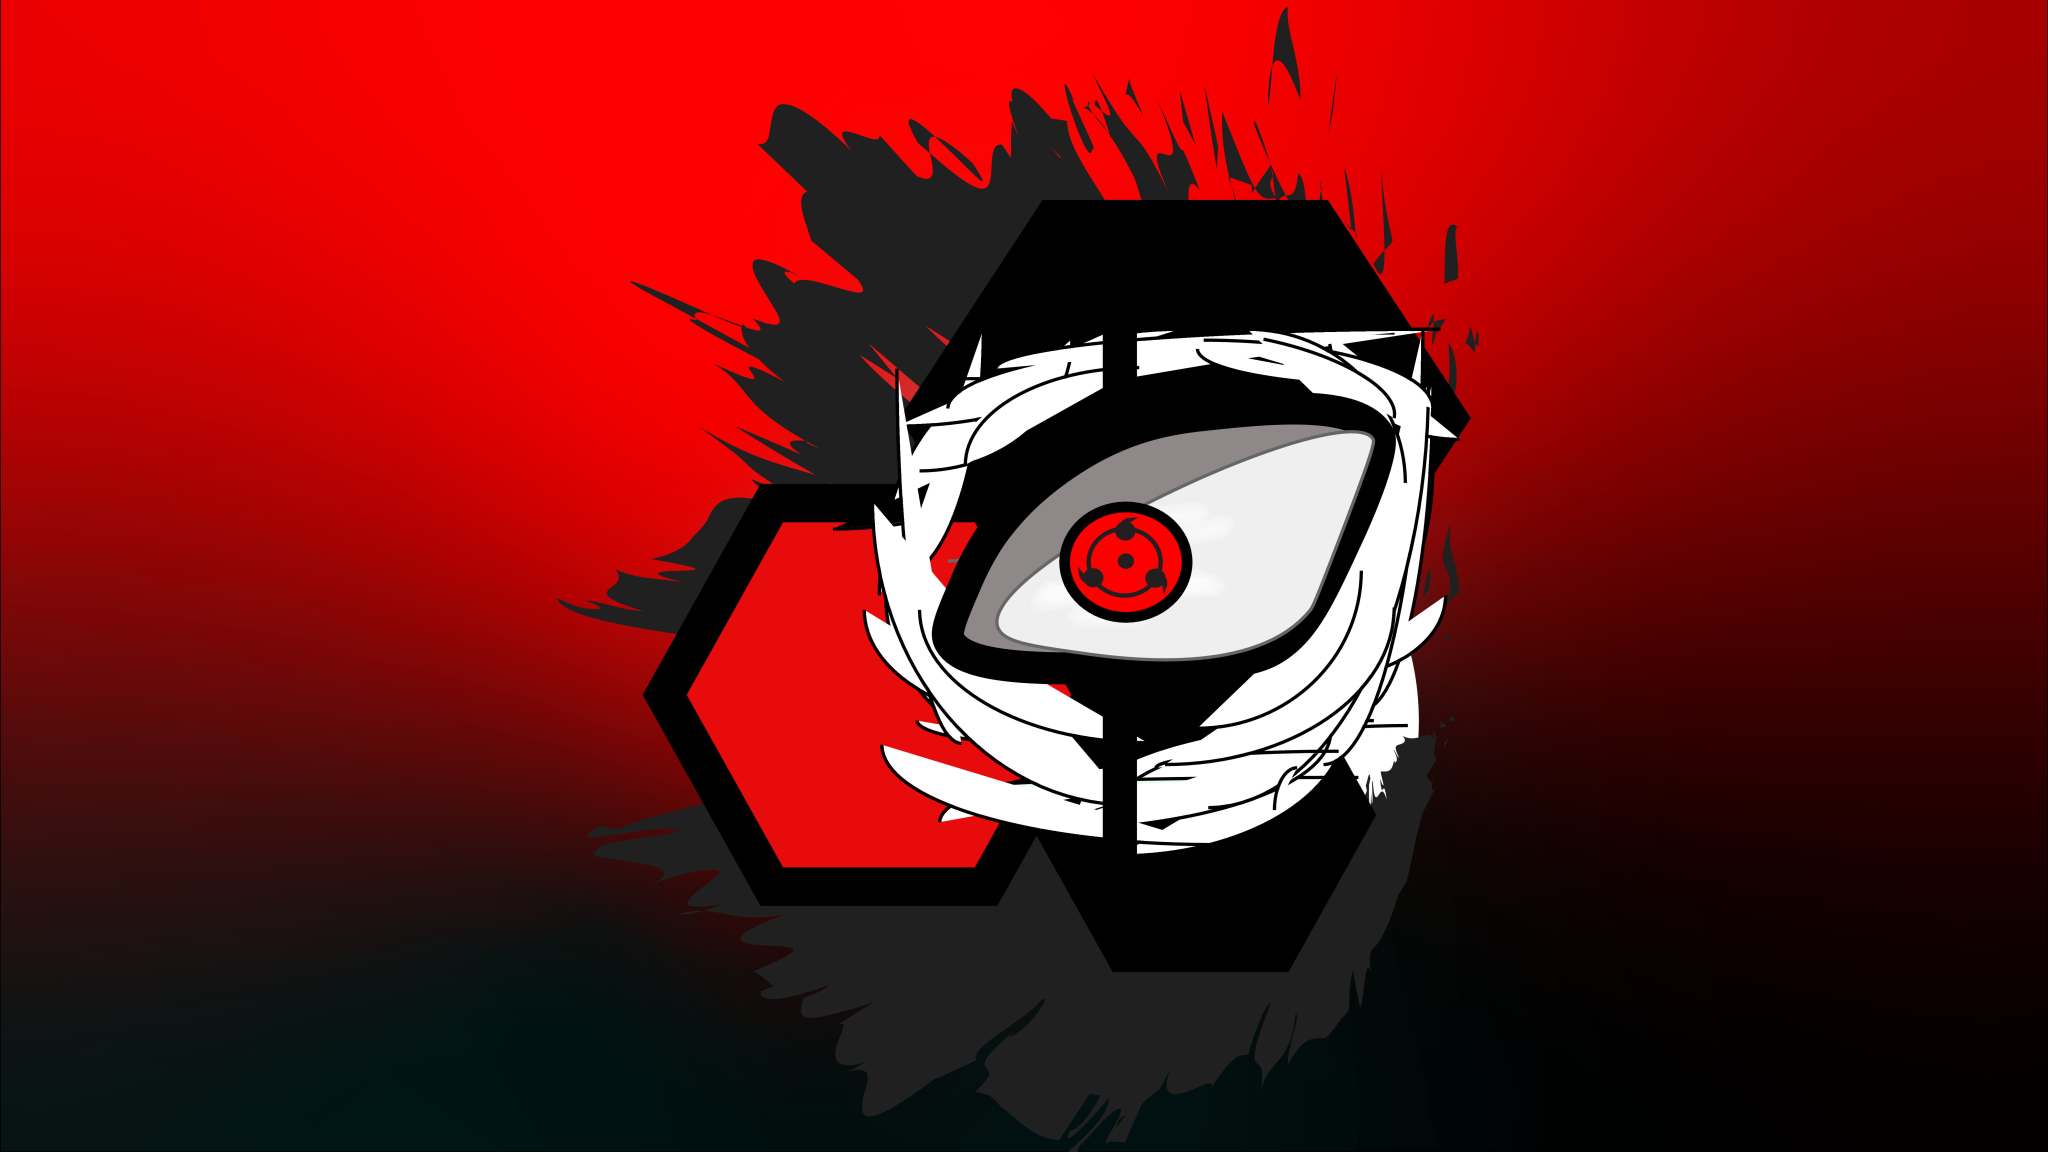 48x1152 Sharingan 8k Naruto 48x1152 Resolution Wallpaper Hd Anime 4k Wallpapers Images Photos And Background